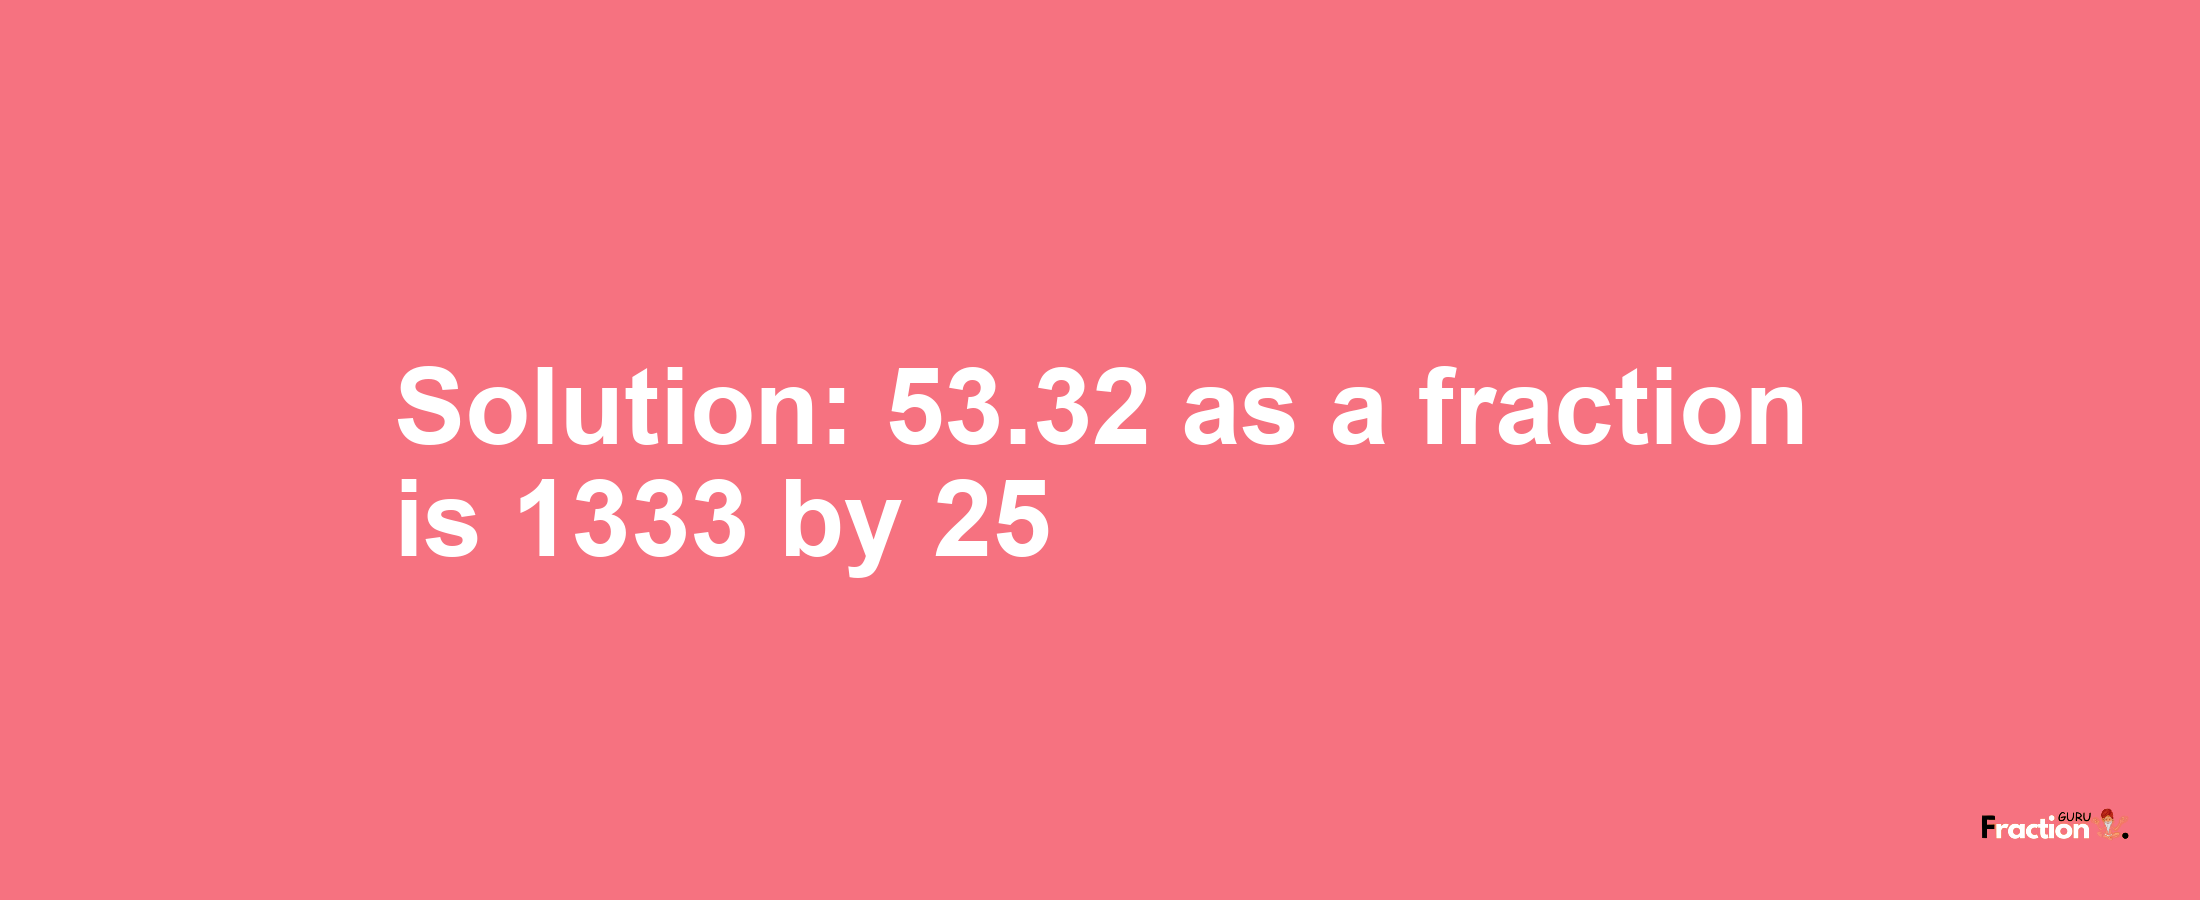 Solution:53.32 as a fraction is 1333/25